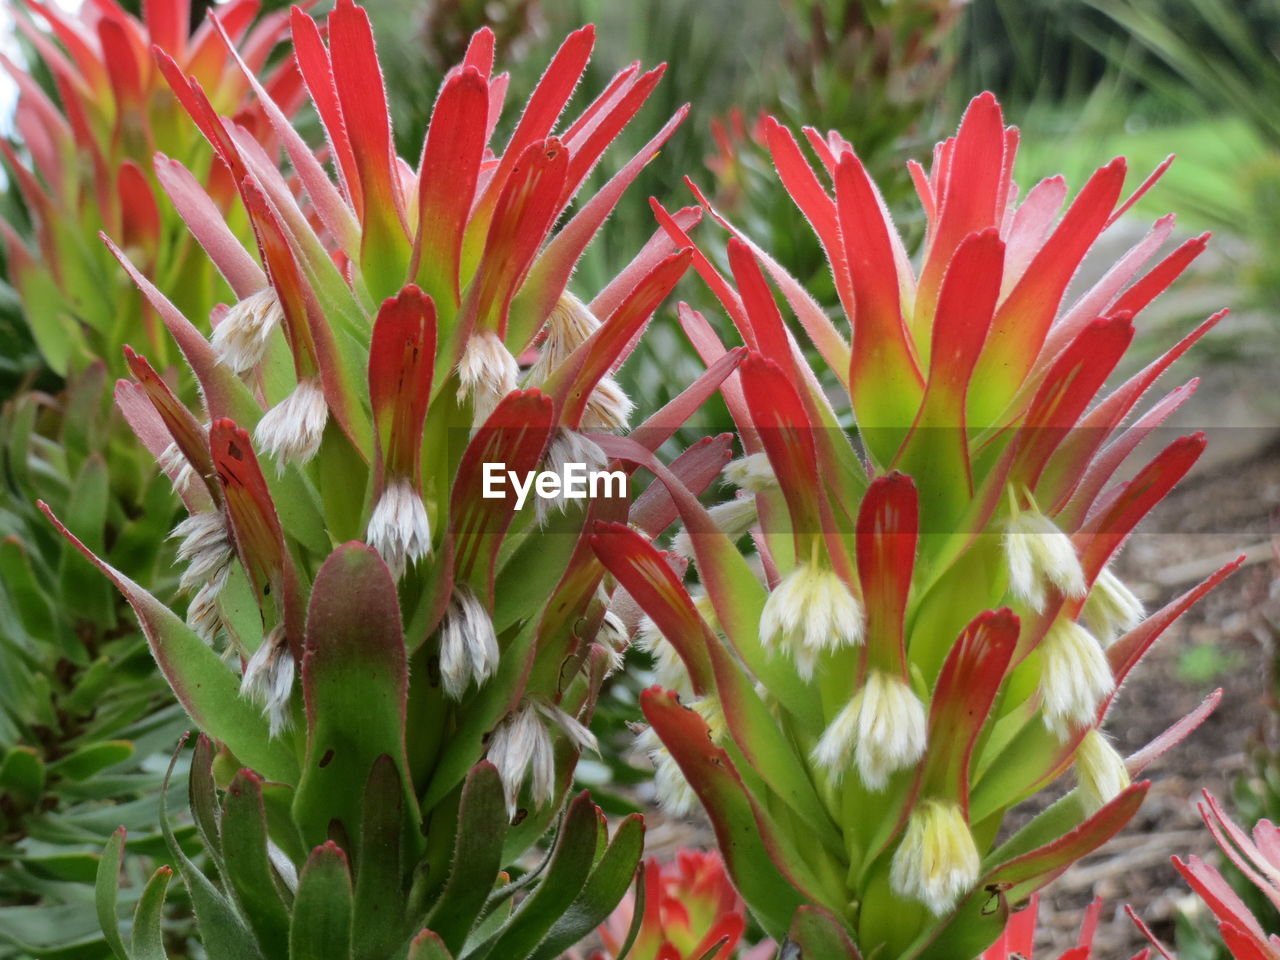 CLOSE-UP OF FRESH RED FLOWERS BLOOMING IN PLANT